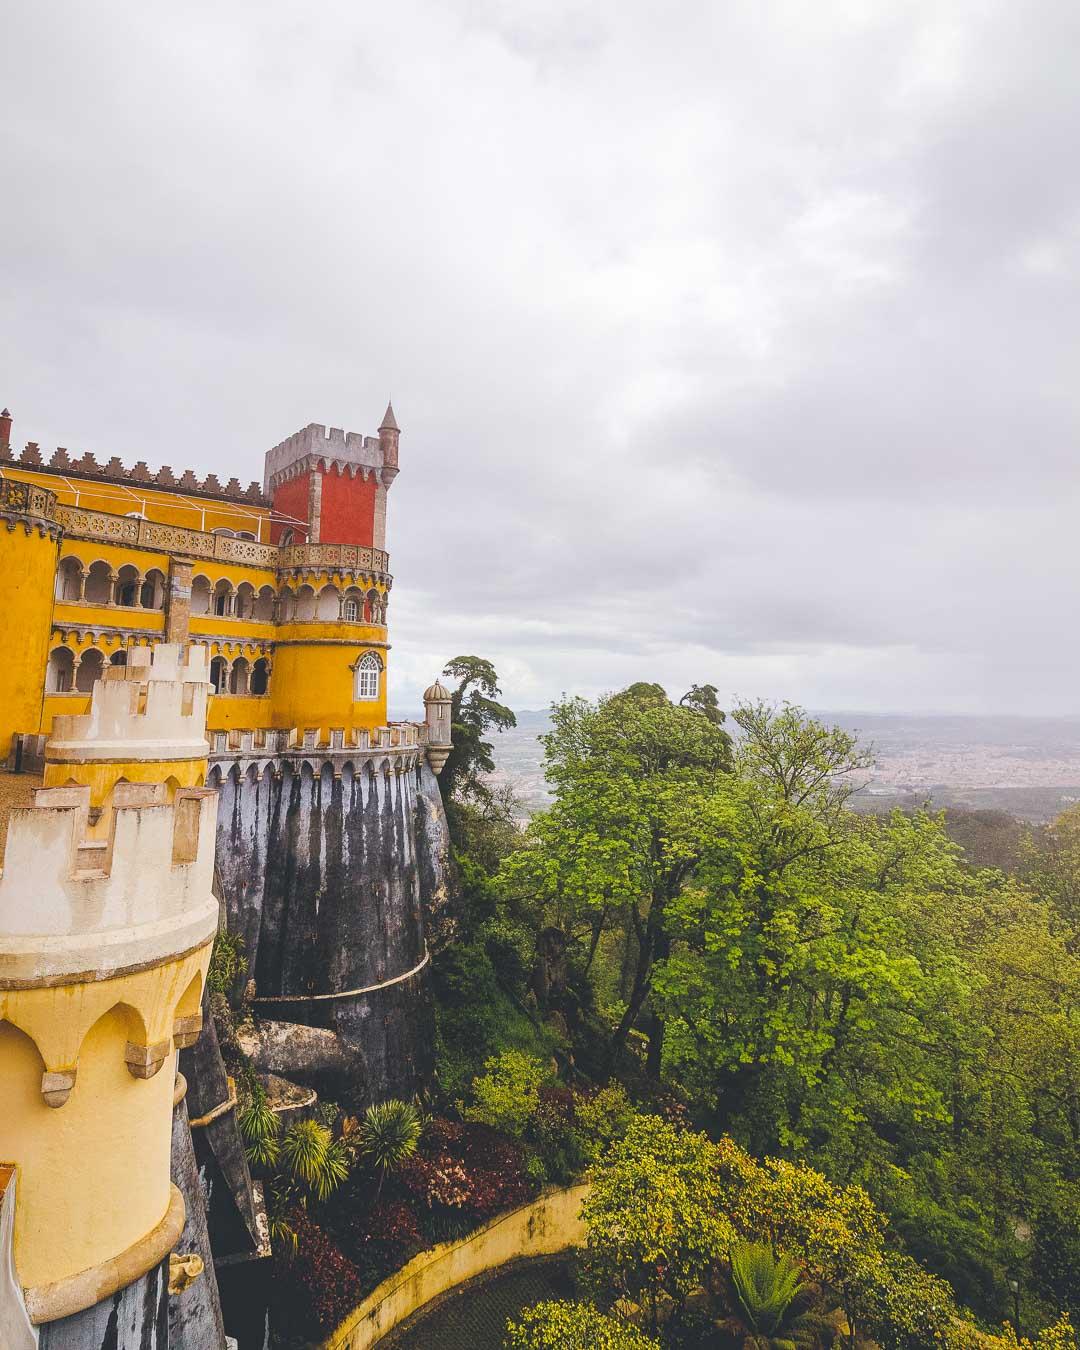 pena palace contrasting with the green forest